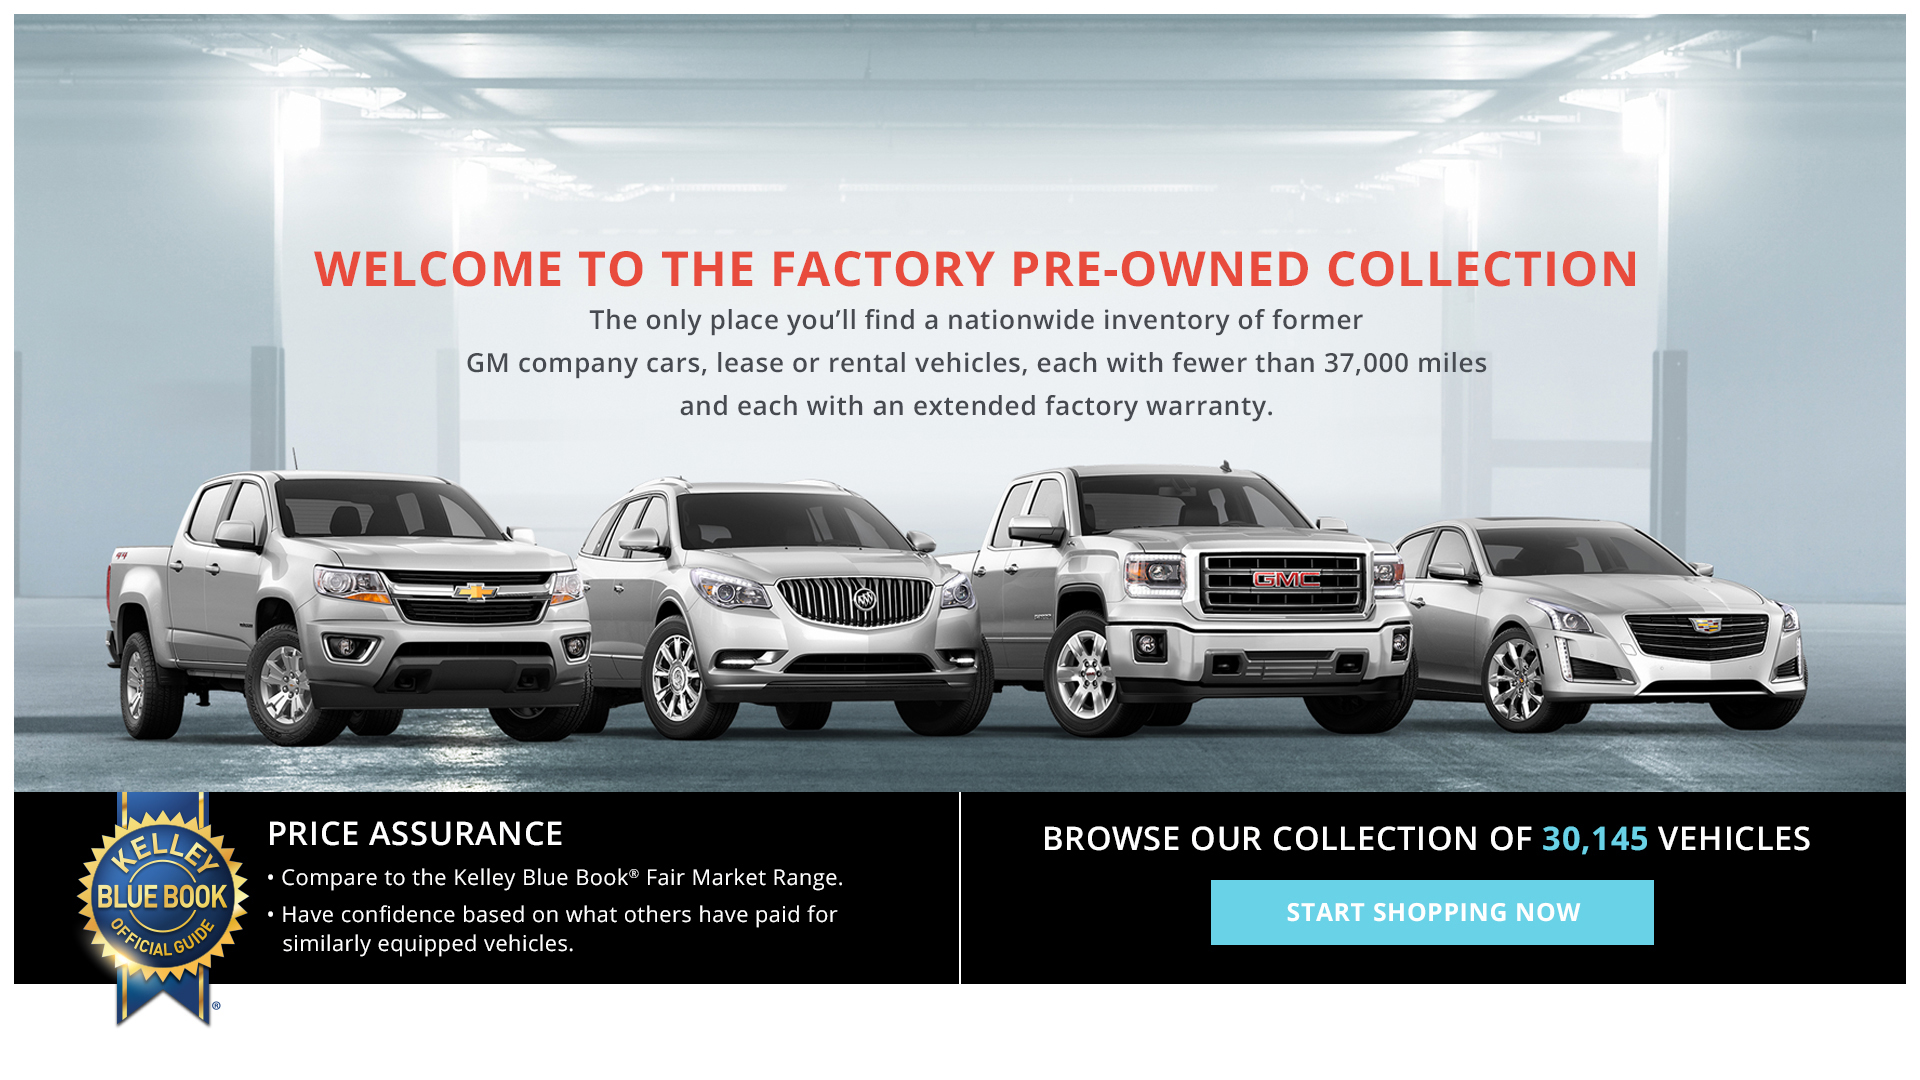 GM Factory Pre-Owned Collection Website Takes Used Car ...